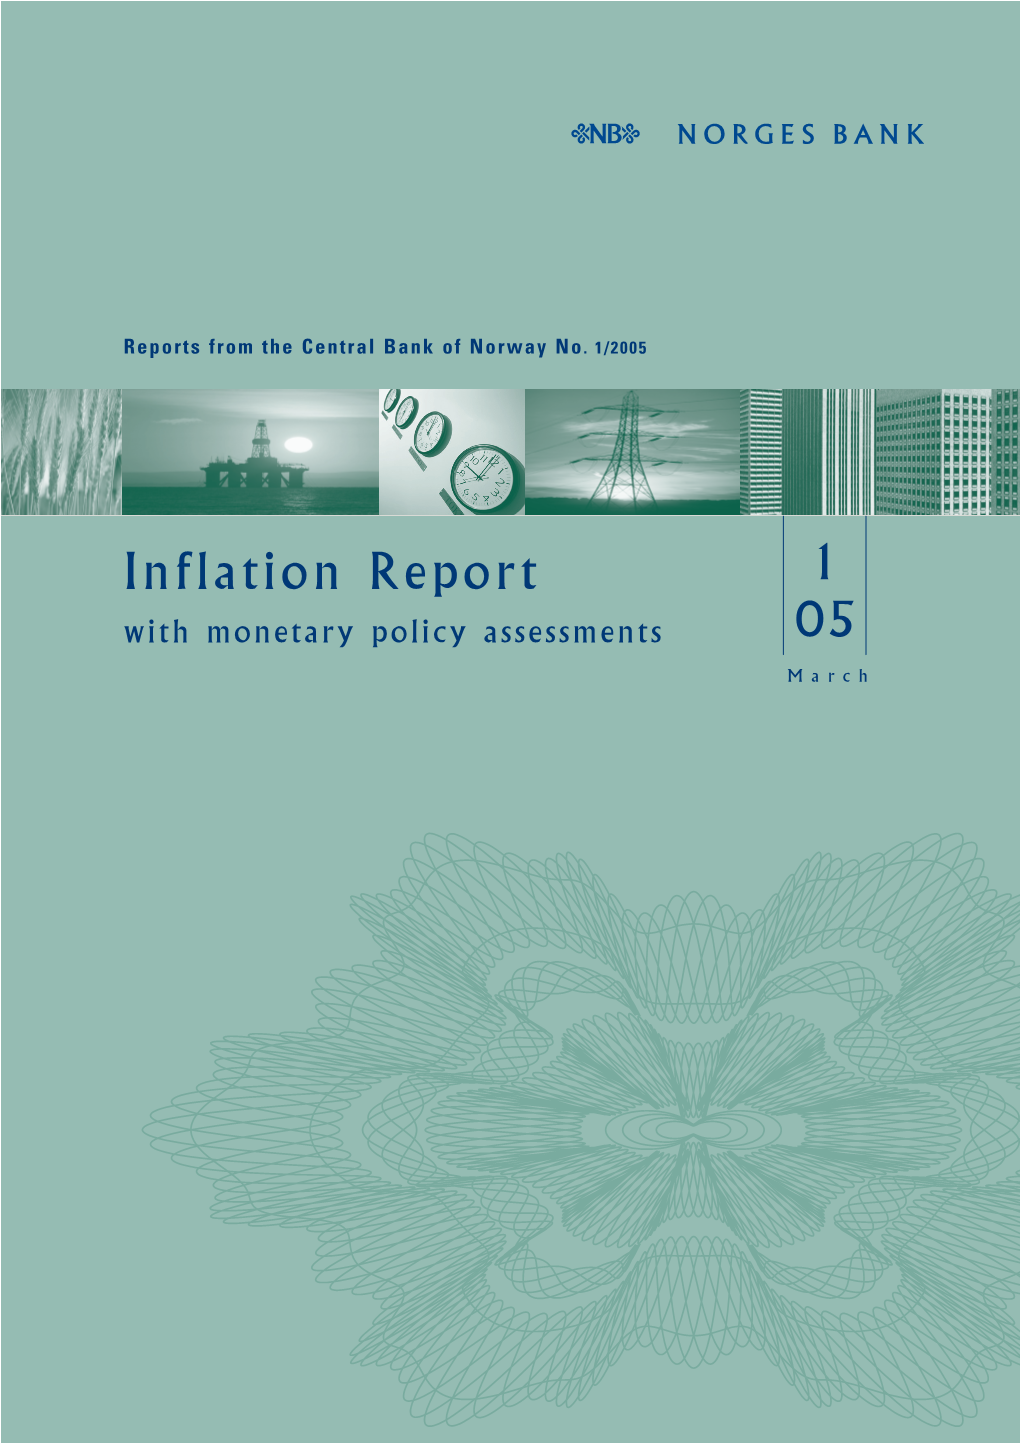 Inflation Report 1 with Monetary Policy Assessments 05